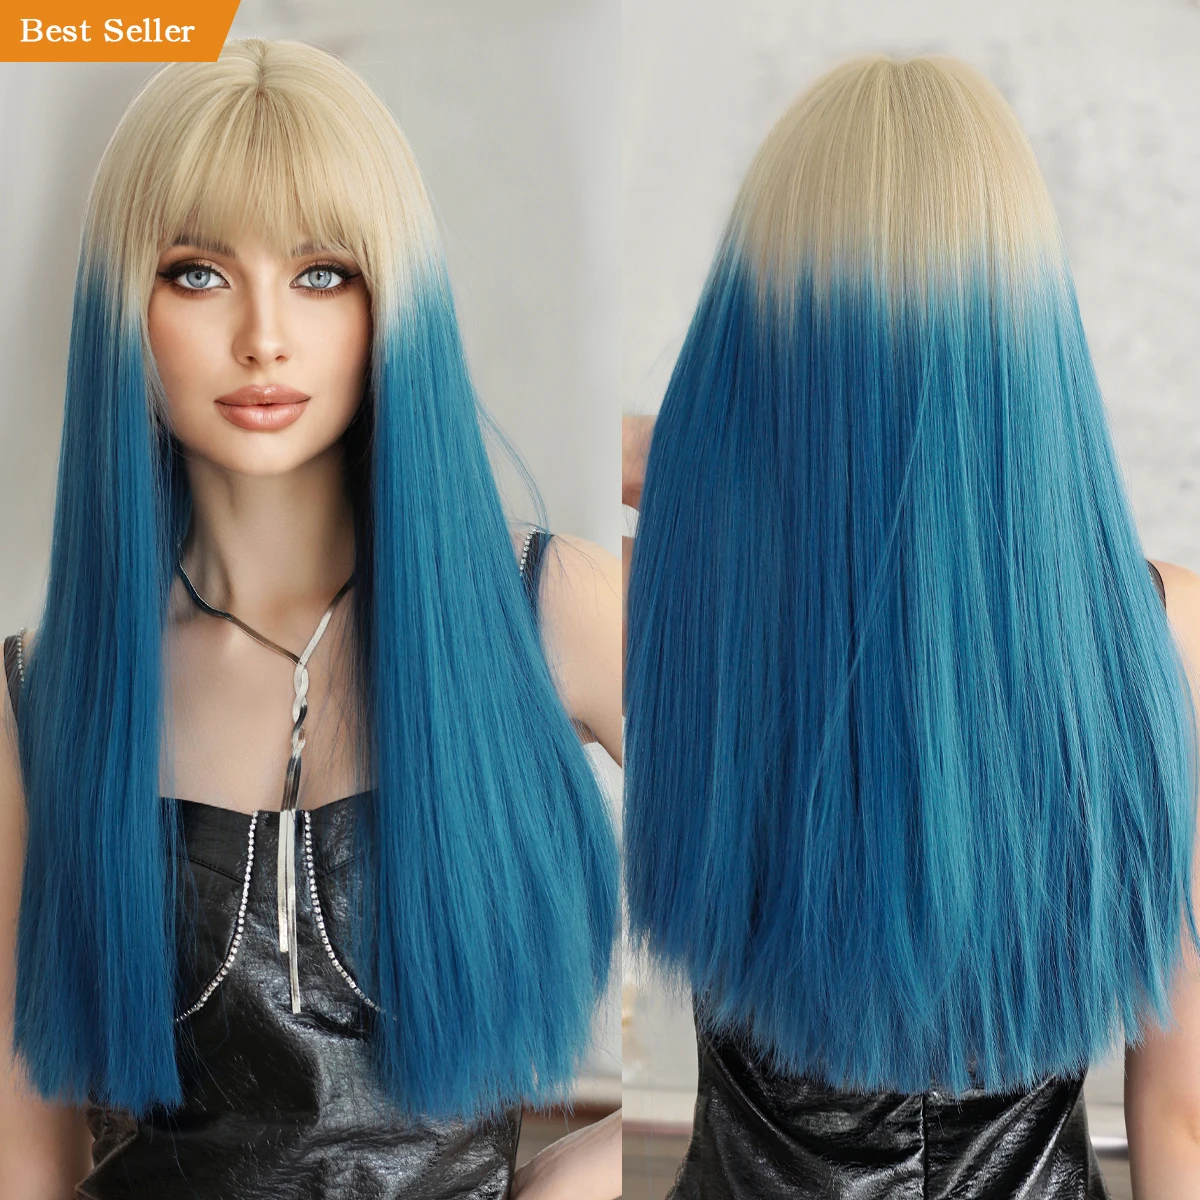 

Wholesale Wig Long Straight Perruques with Ombre Blue Bangs Blonde Pink Red Gray Synthetic Wig for Anime Cosplay Pelucas Perucas